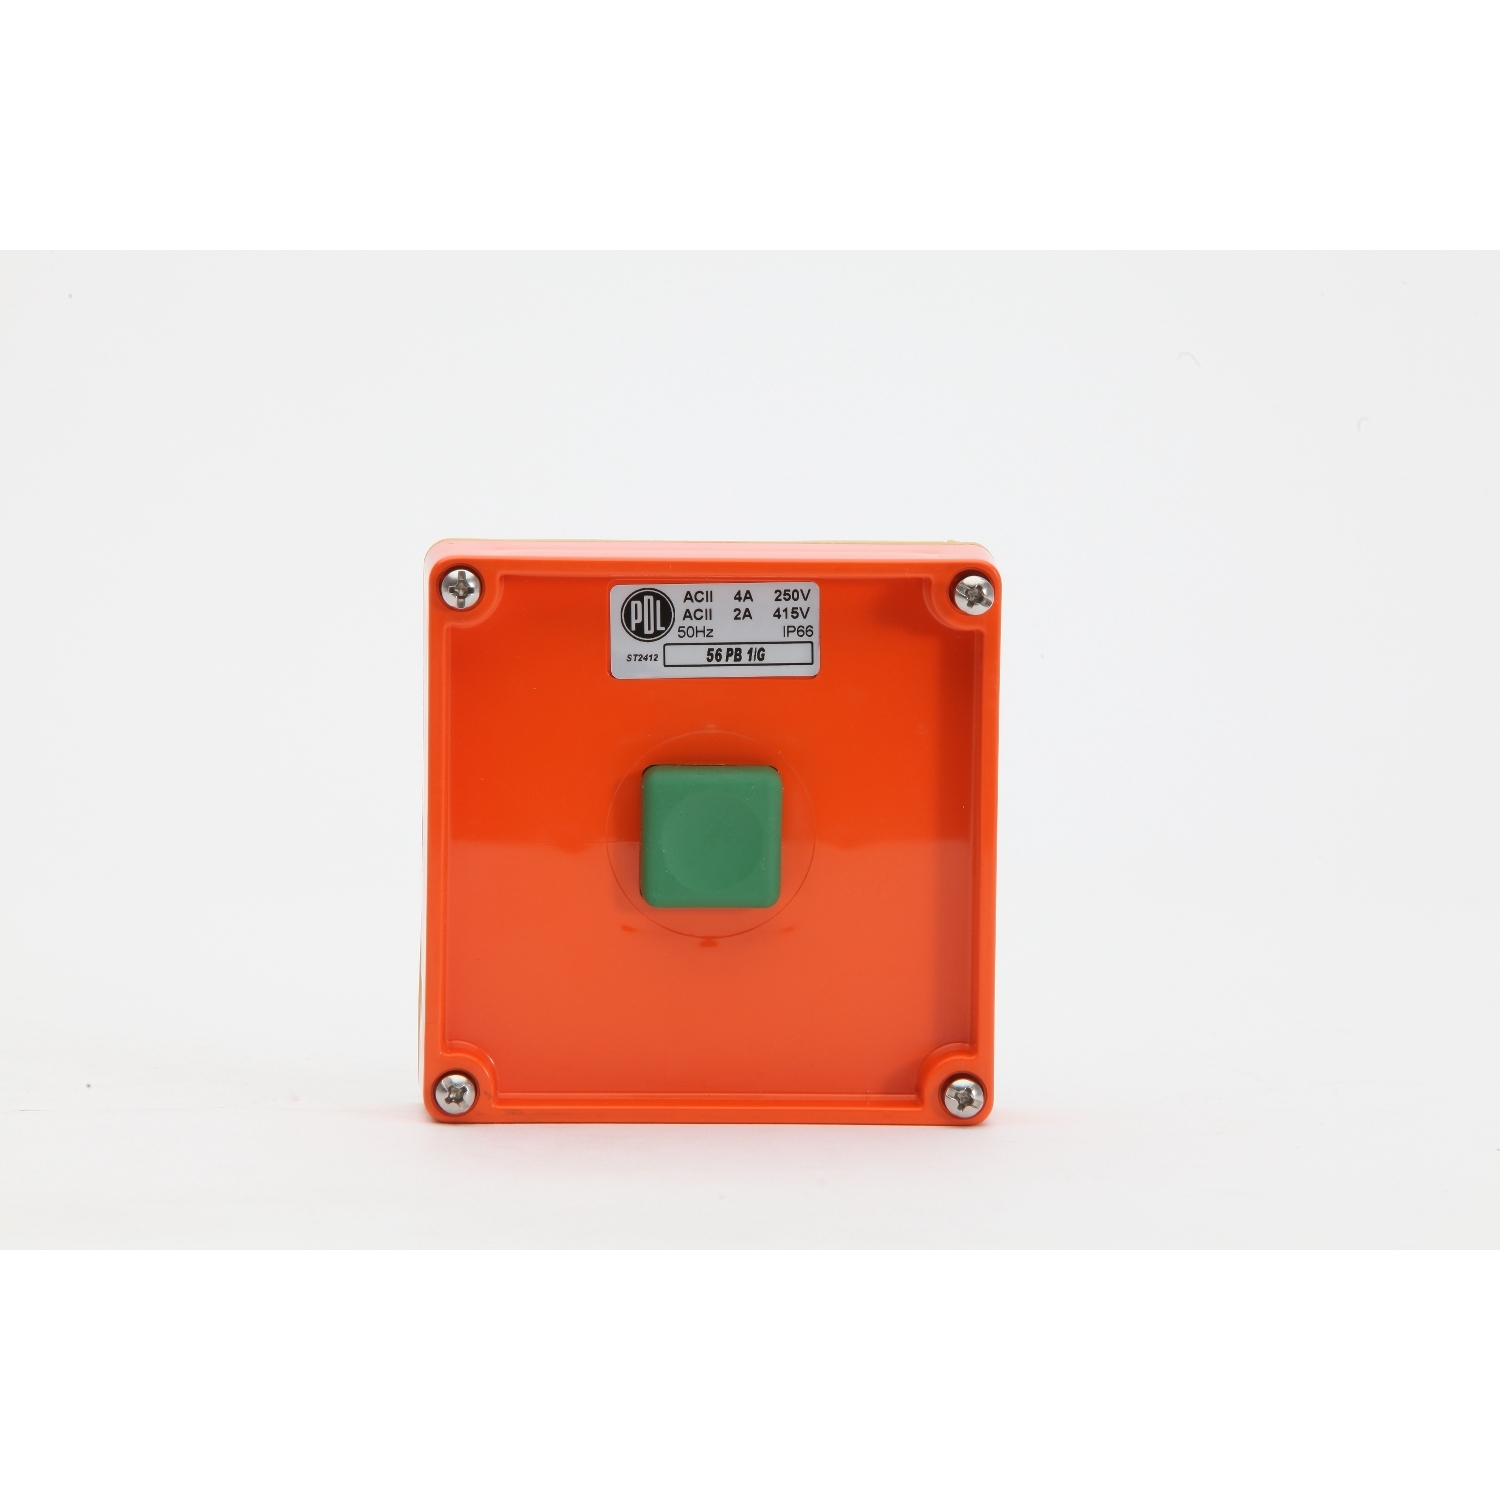 PDL 56 Series - Momentary Push Button Switch Green Button IP66 - Chemical-Resistant Orange